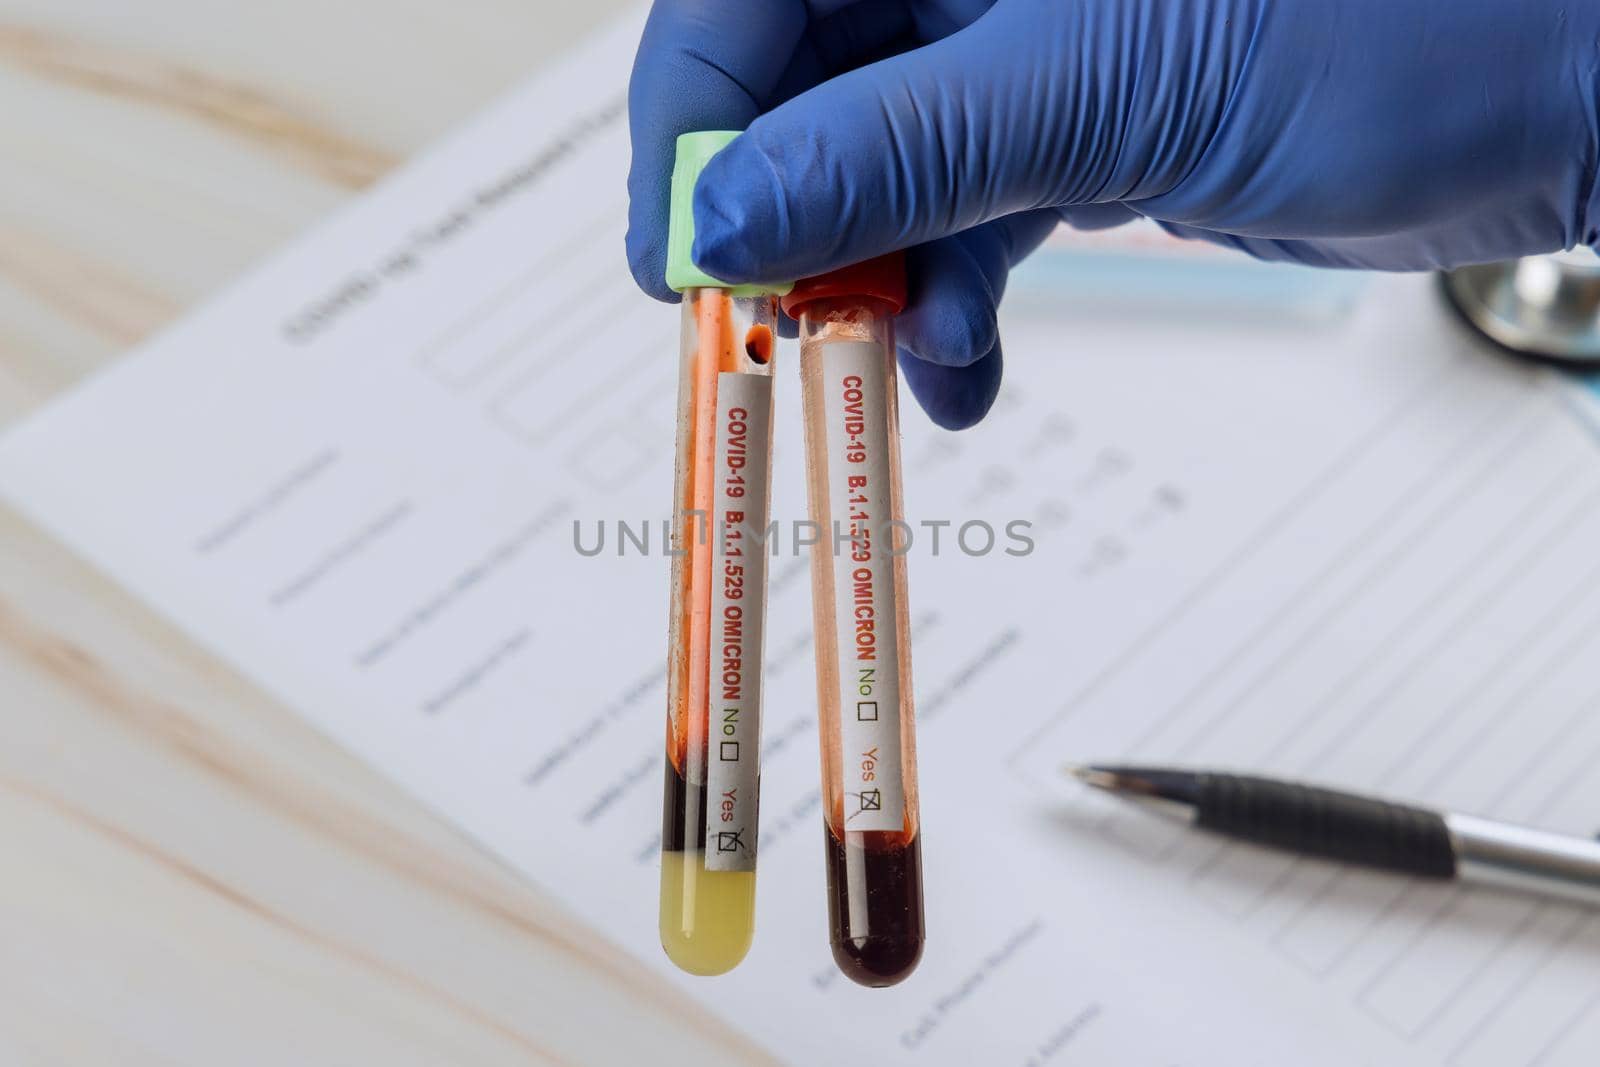 Test to detect new version Omicron COVID-19 coronavirus in patient samples blood tested positive